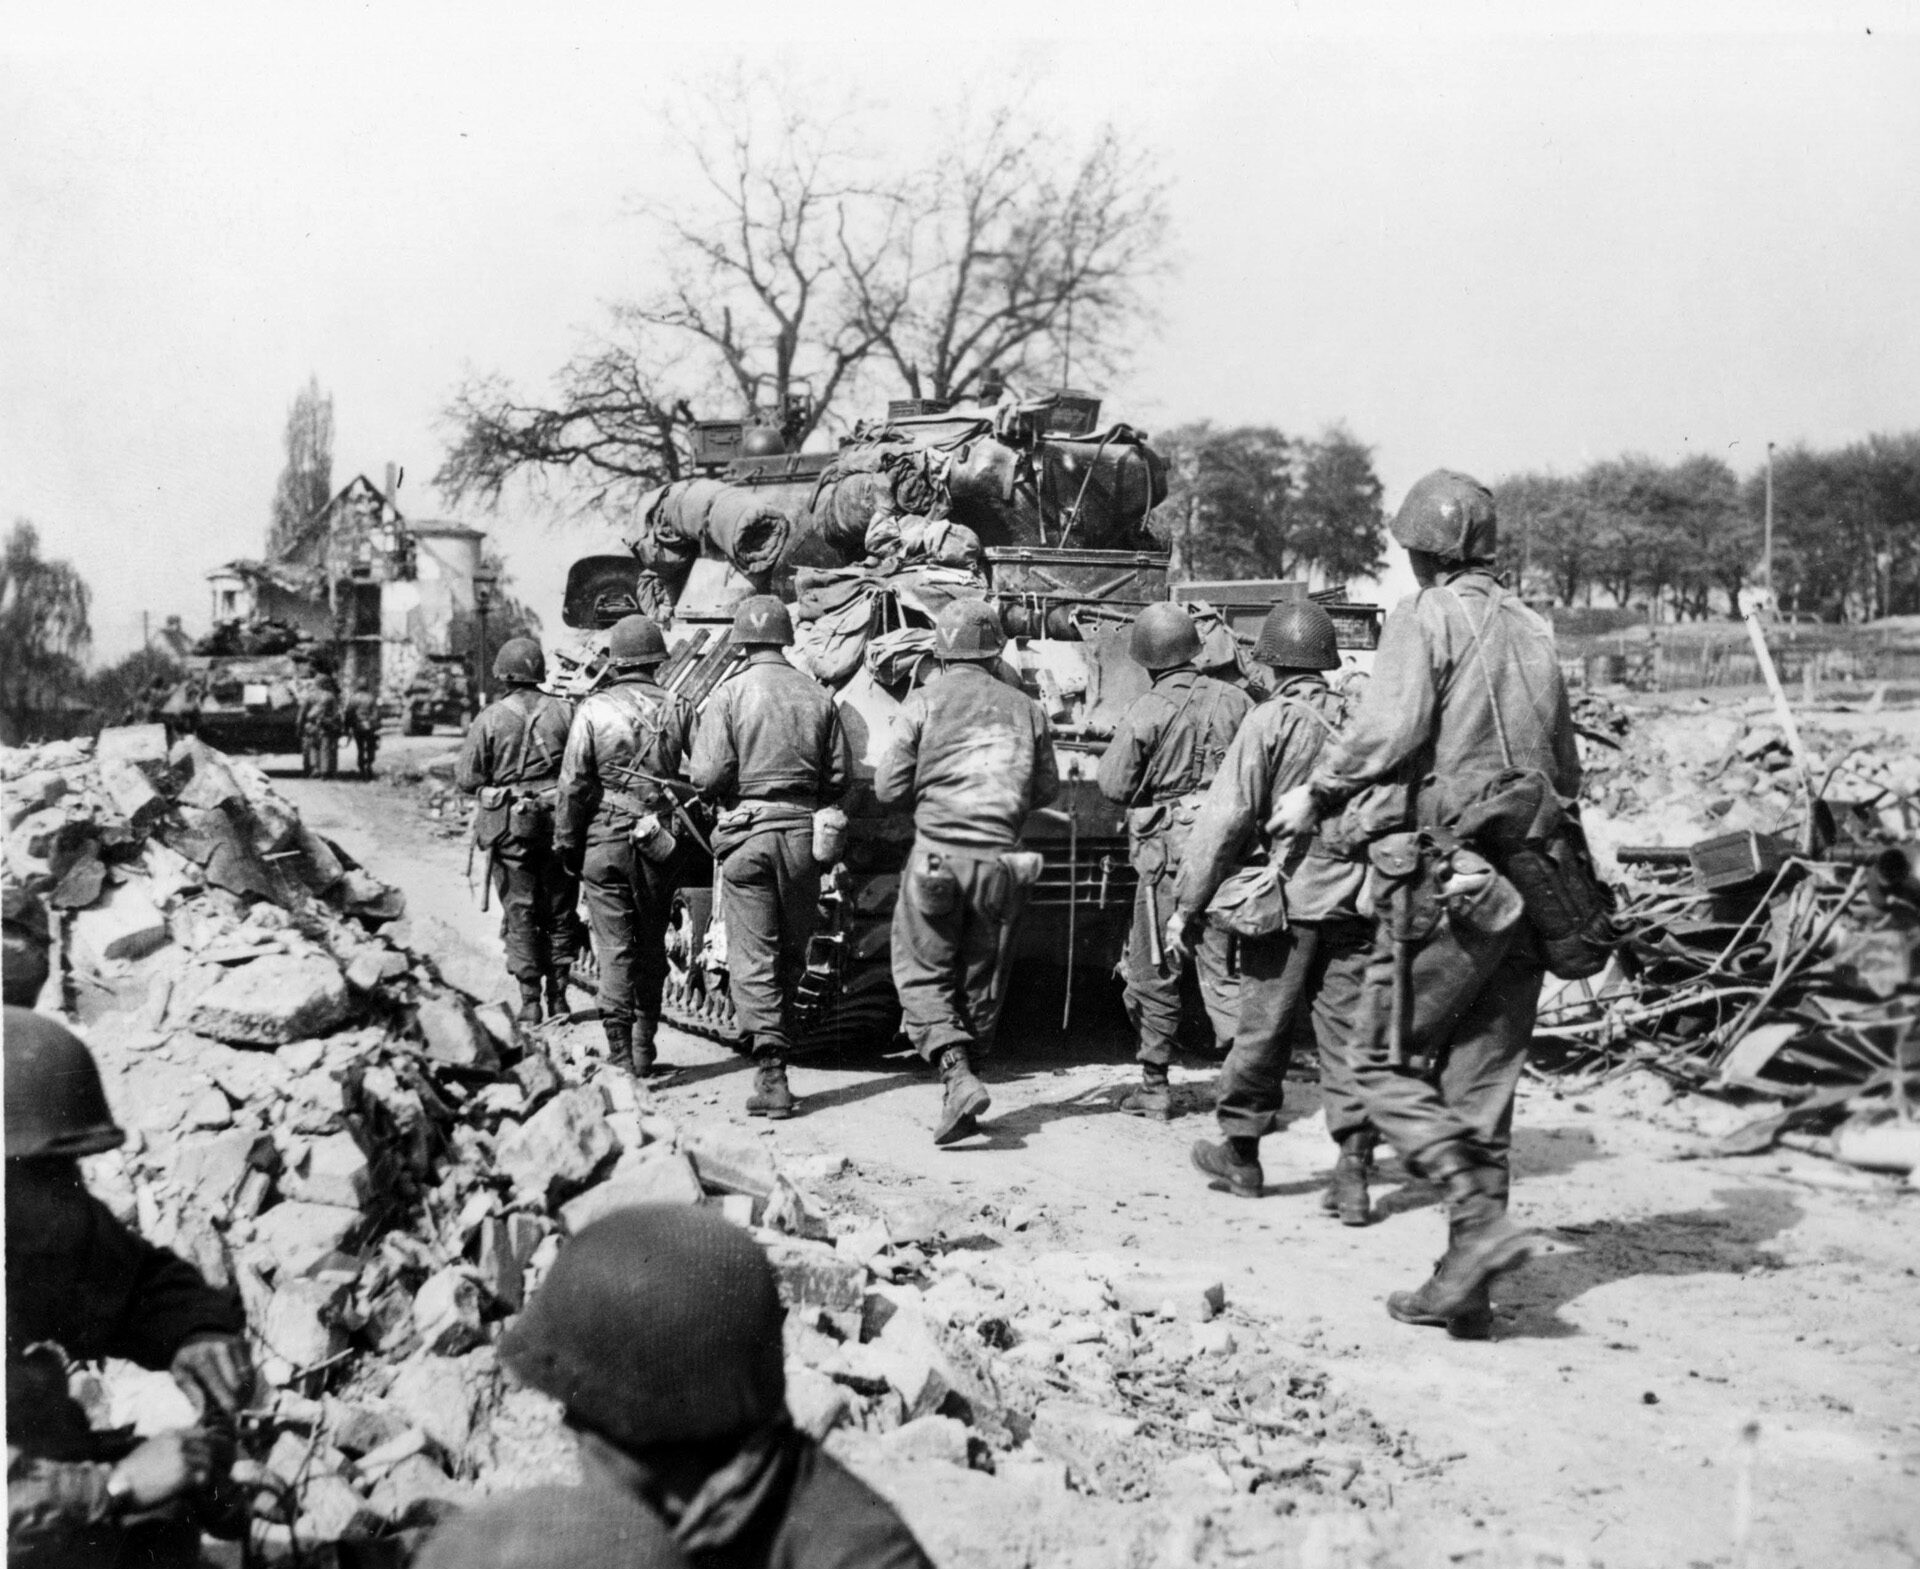 Advancing warily, soldiers of the 3rd Infantry Division take cover behind armored vehicles against potential incoming German fire. The 3rd Division and soldiers like Larimore compiled an impressive combat record during World War II.